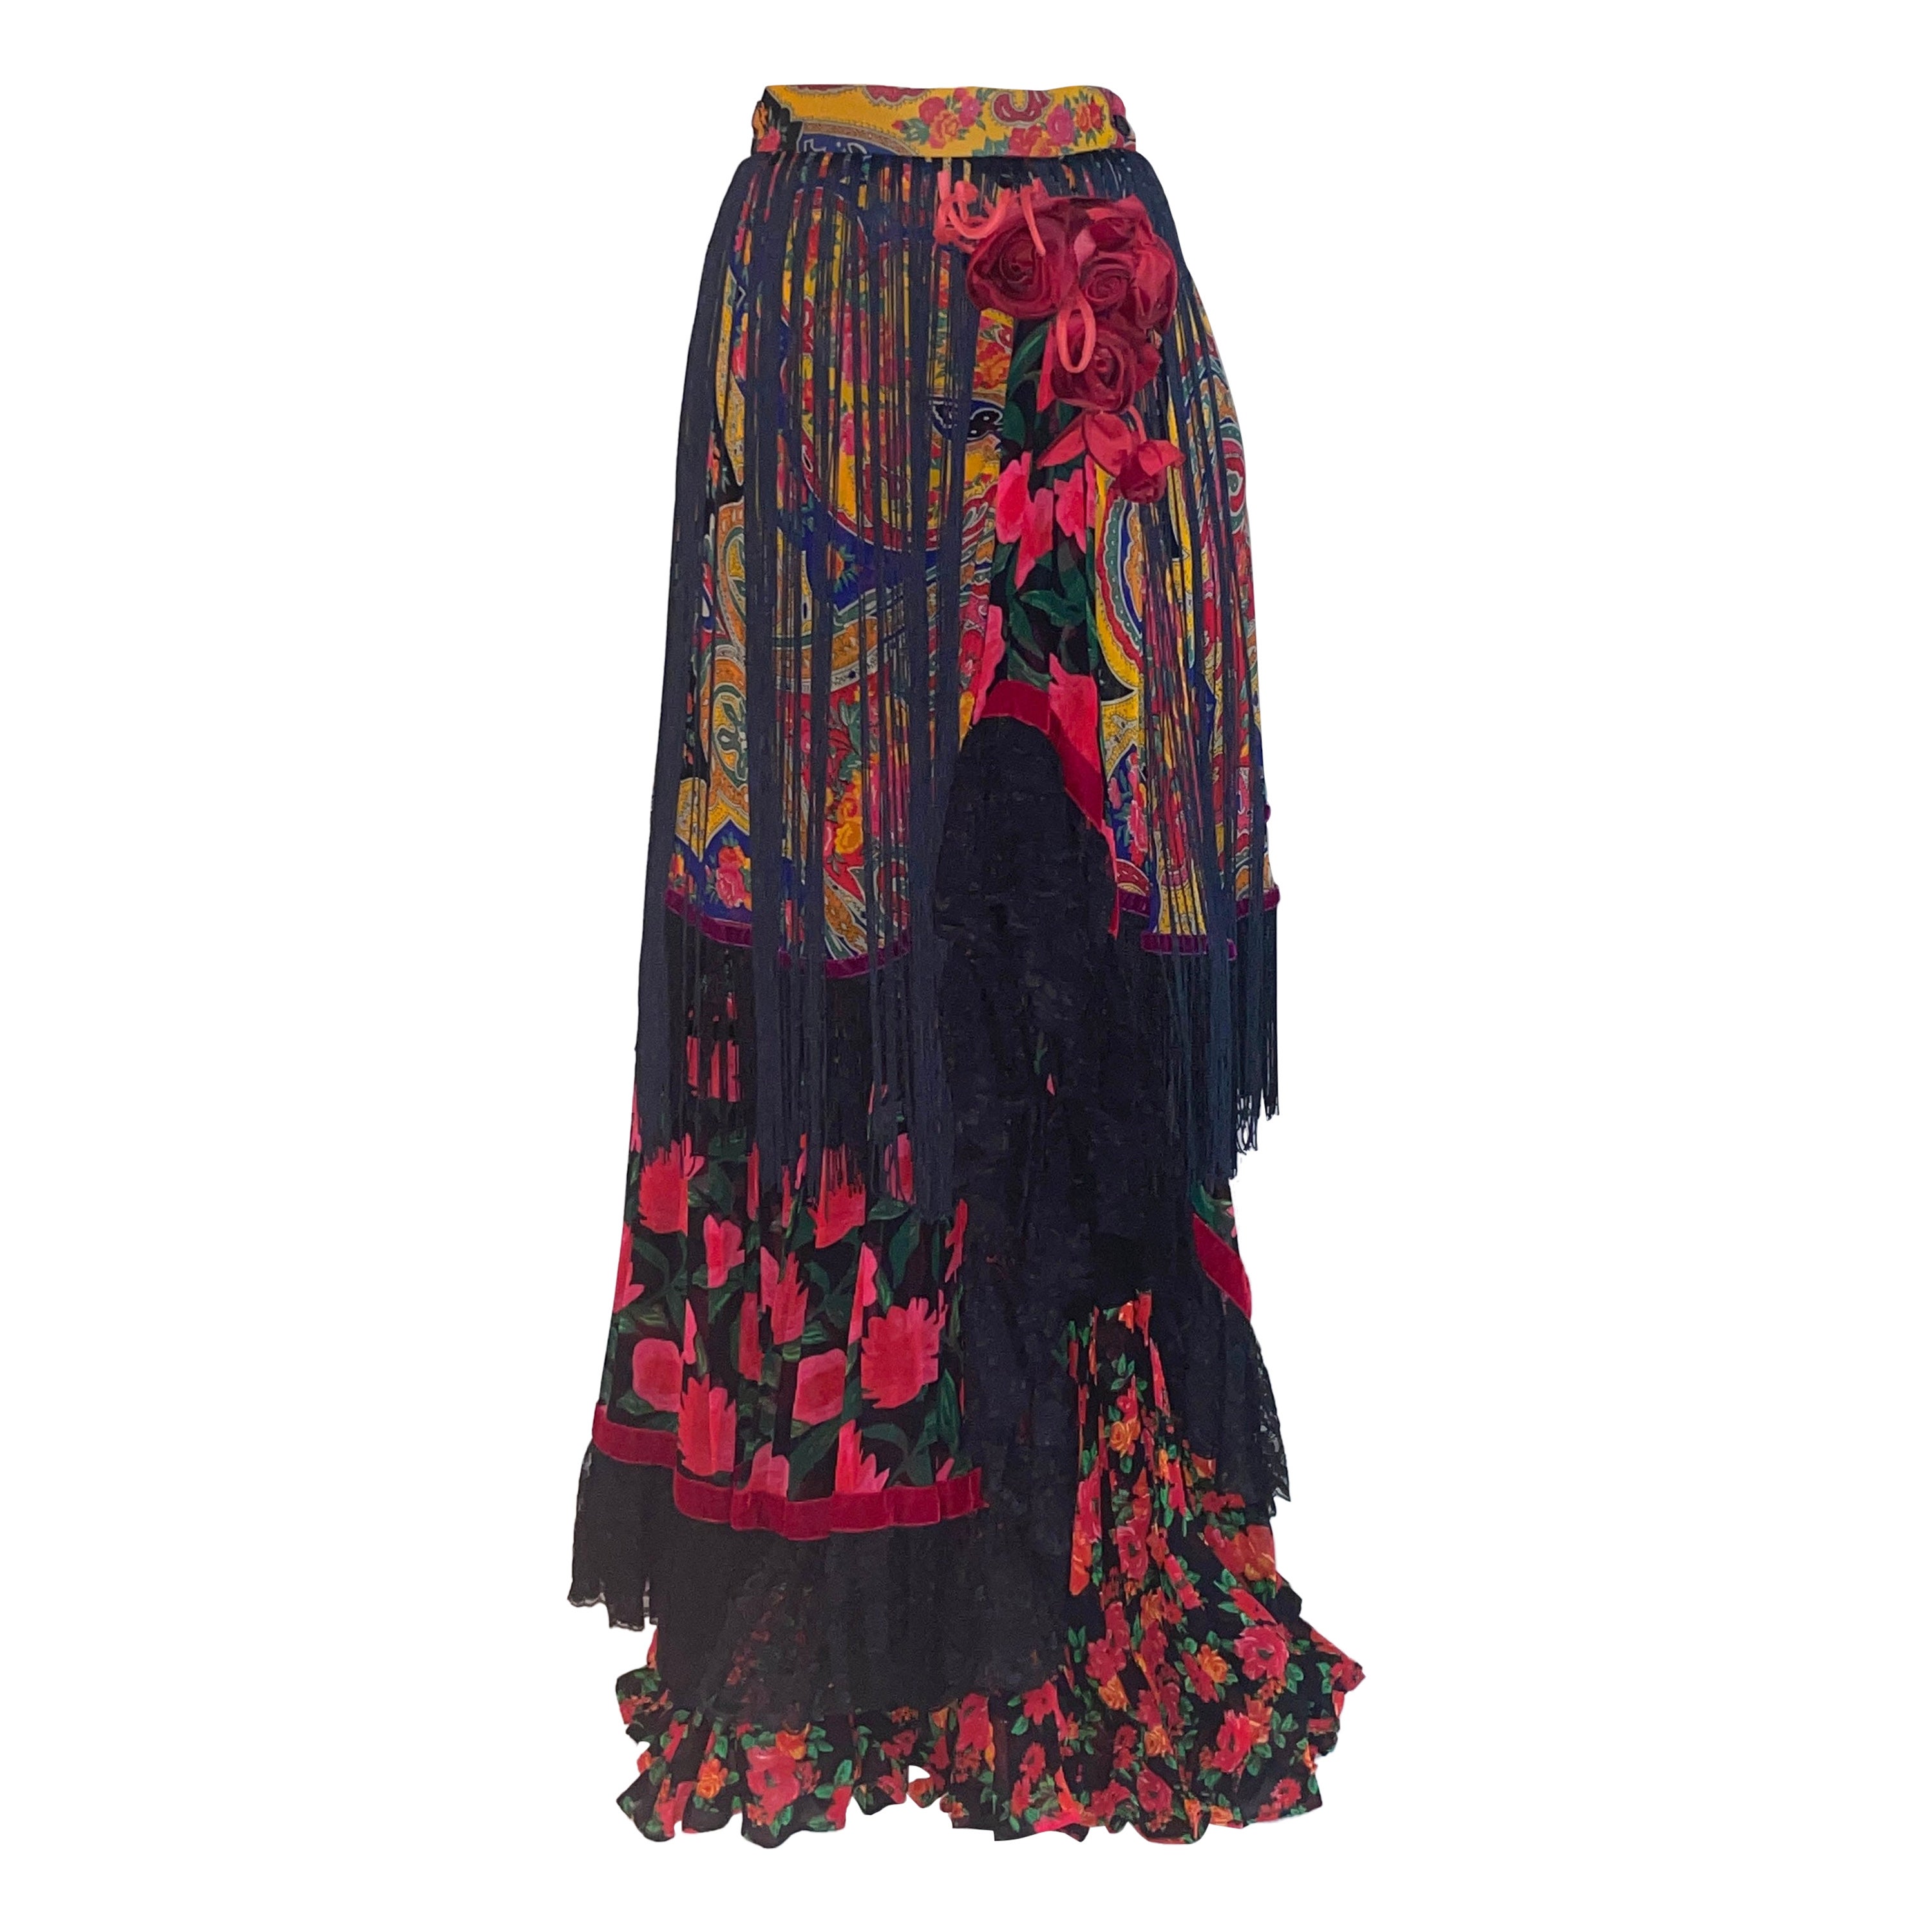 1990s Dolce and Gabbana Tiered Floral Fringe Skirt in Black Red and Yellow